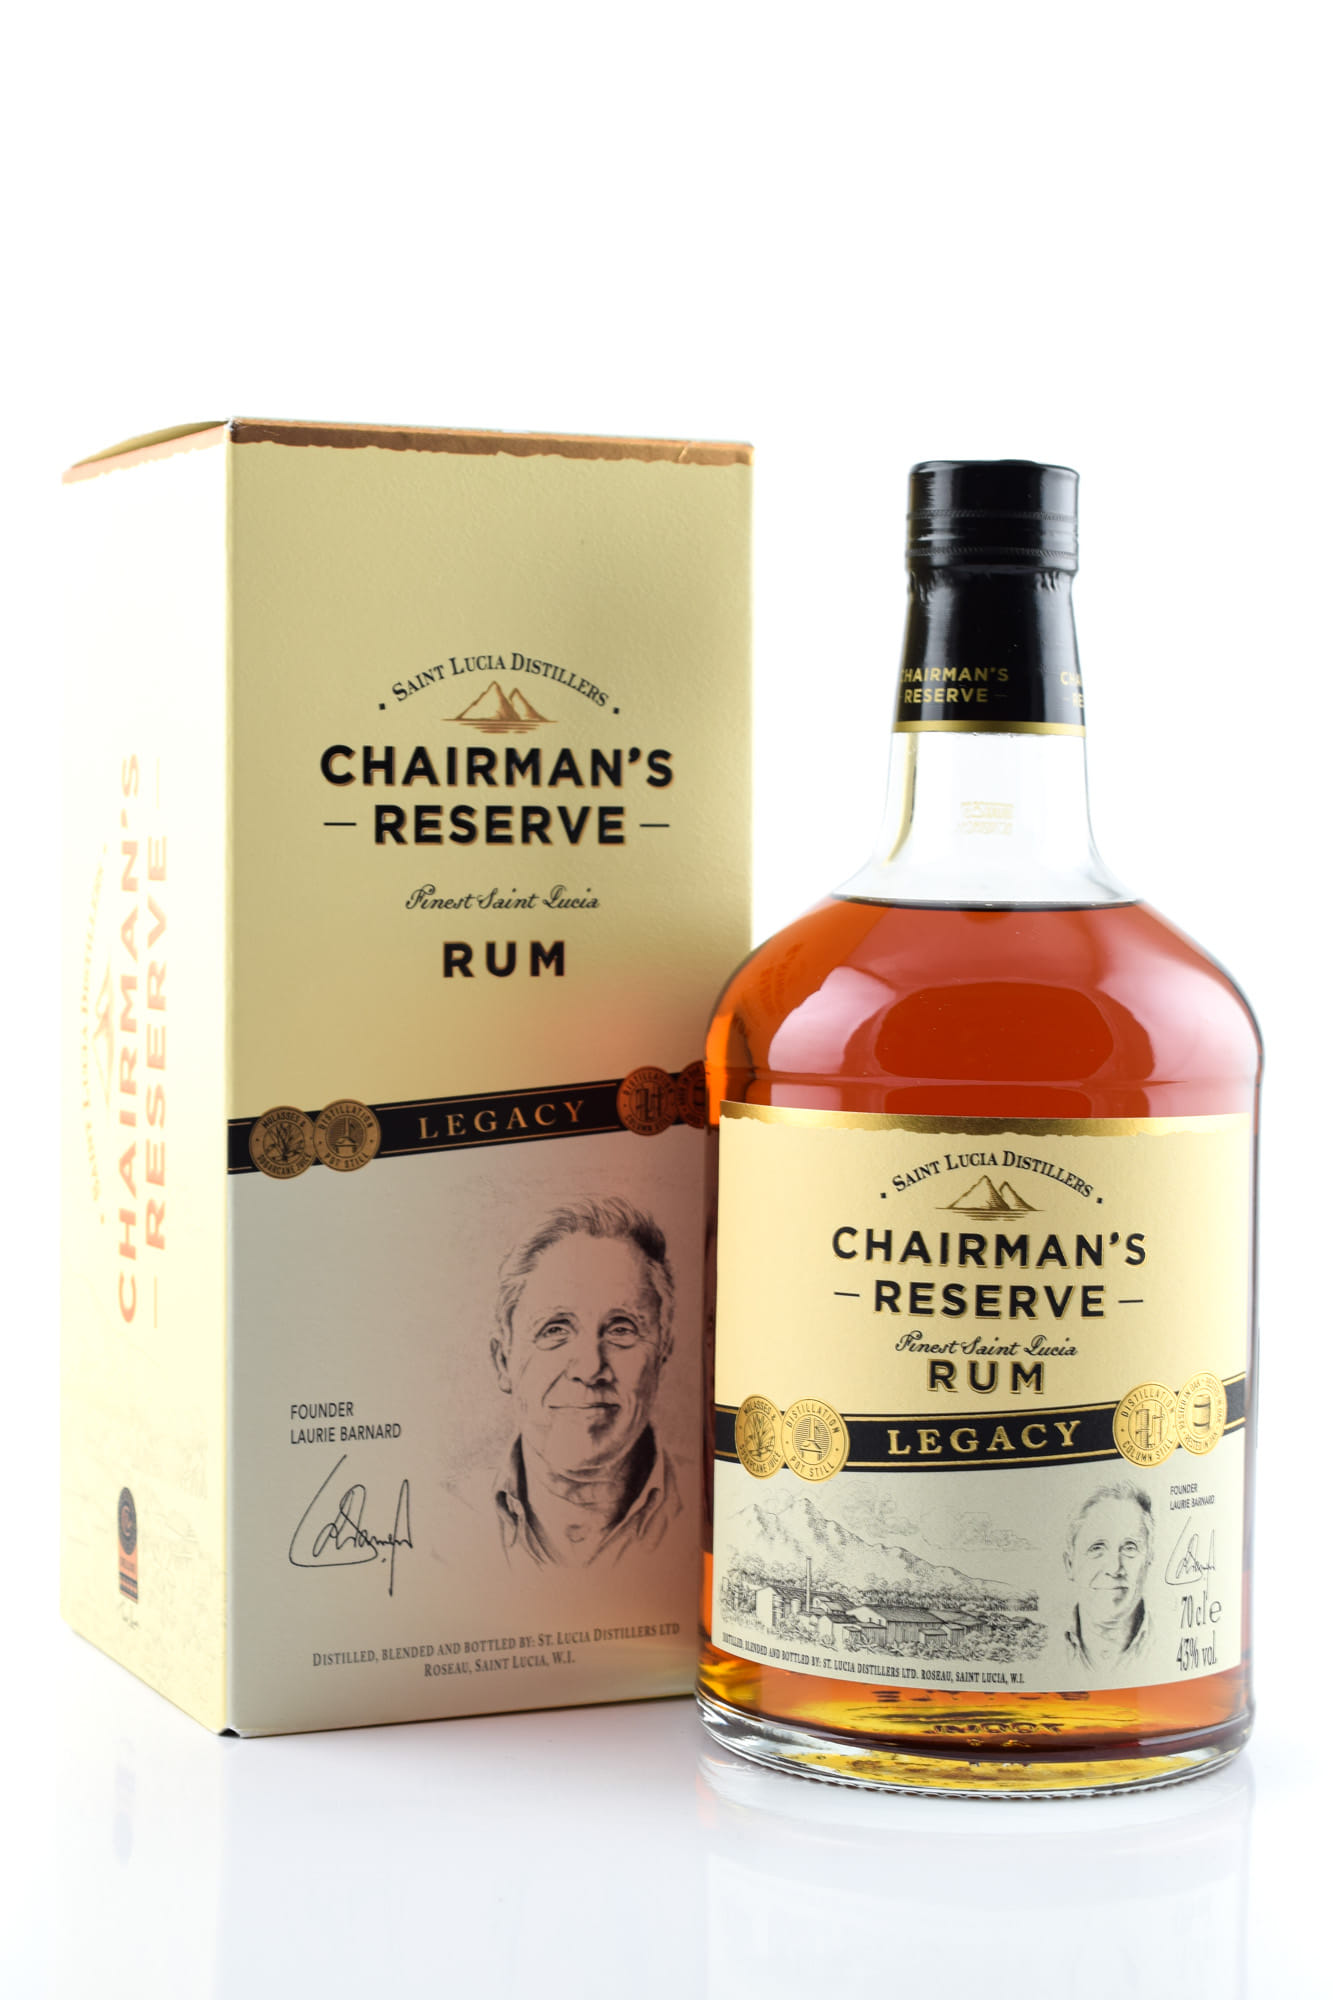 Rum Rum 43%vol. | 0,7l by Home Reserve Rum | | Legacy of Malts type | Chairman\'s